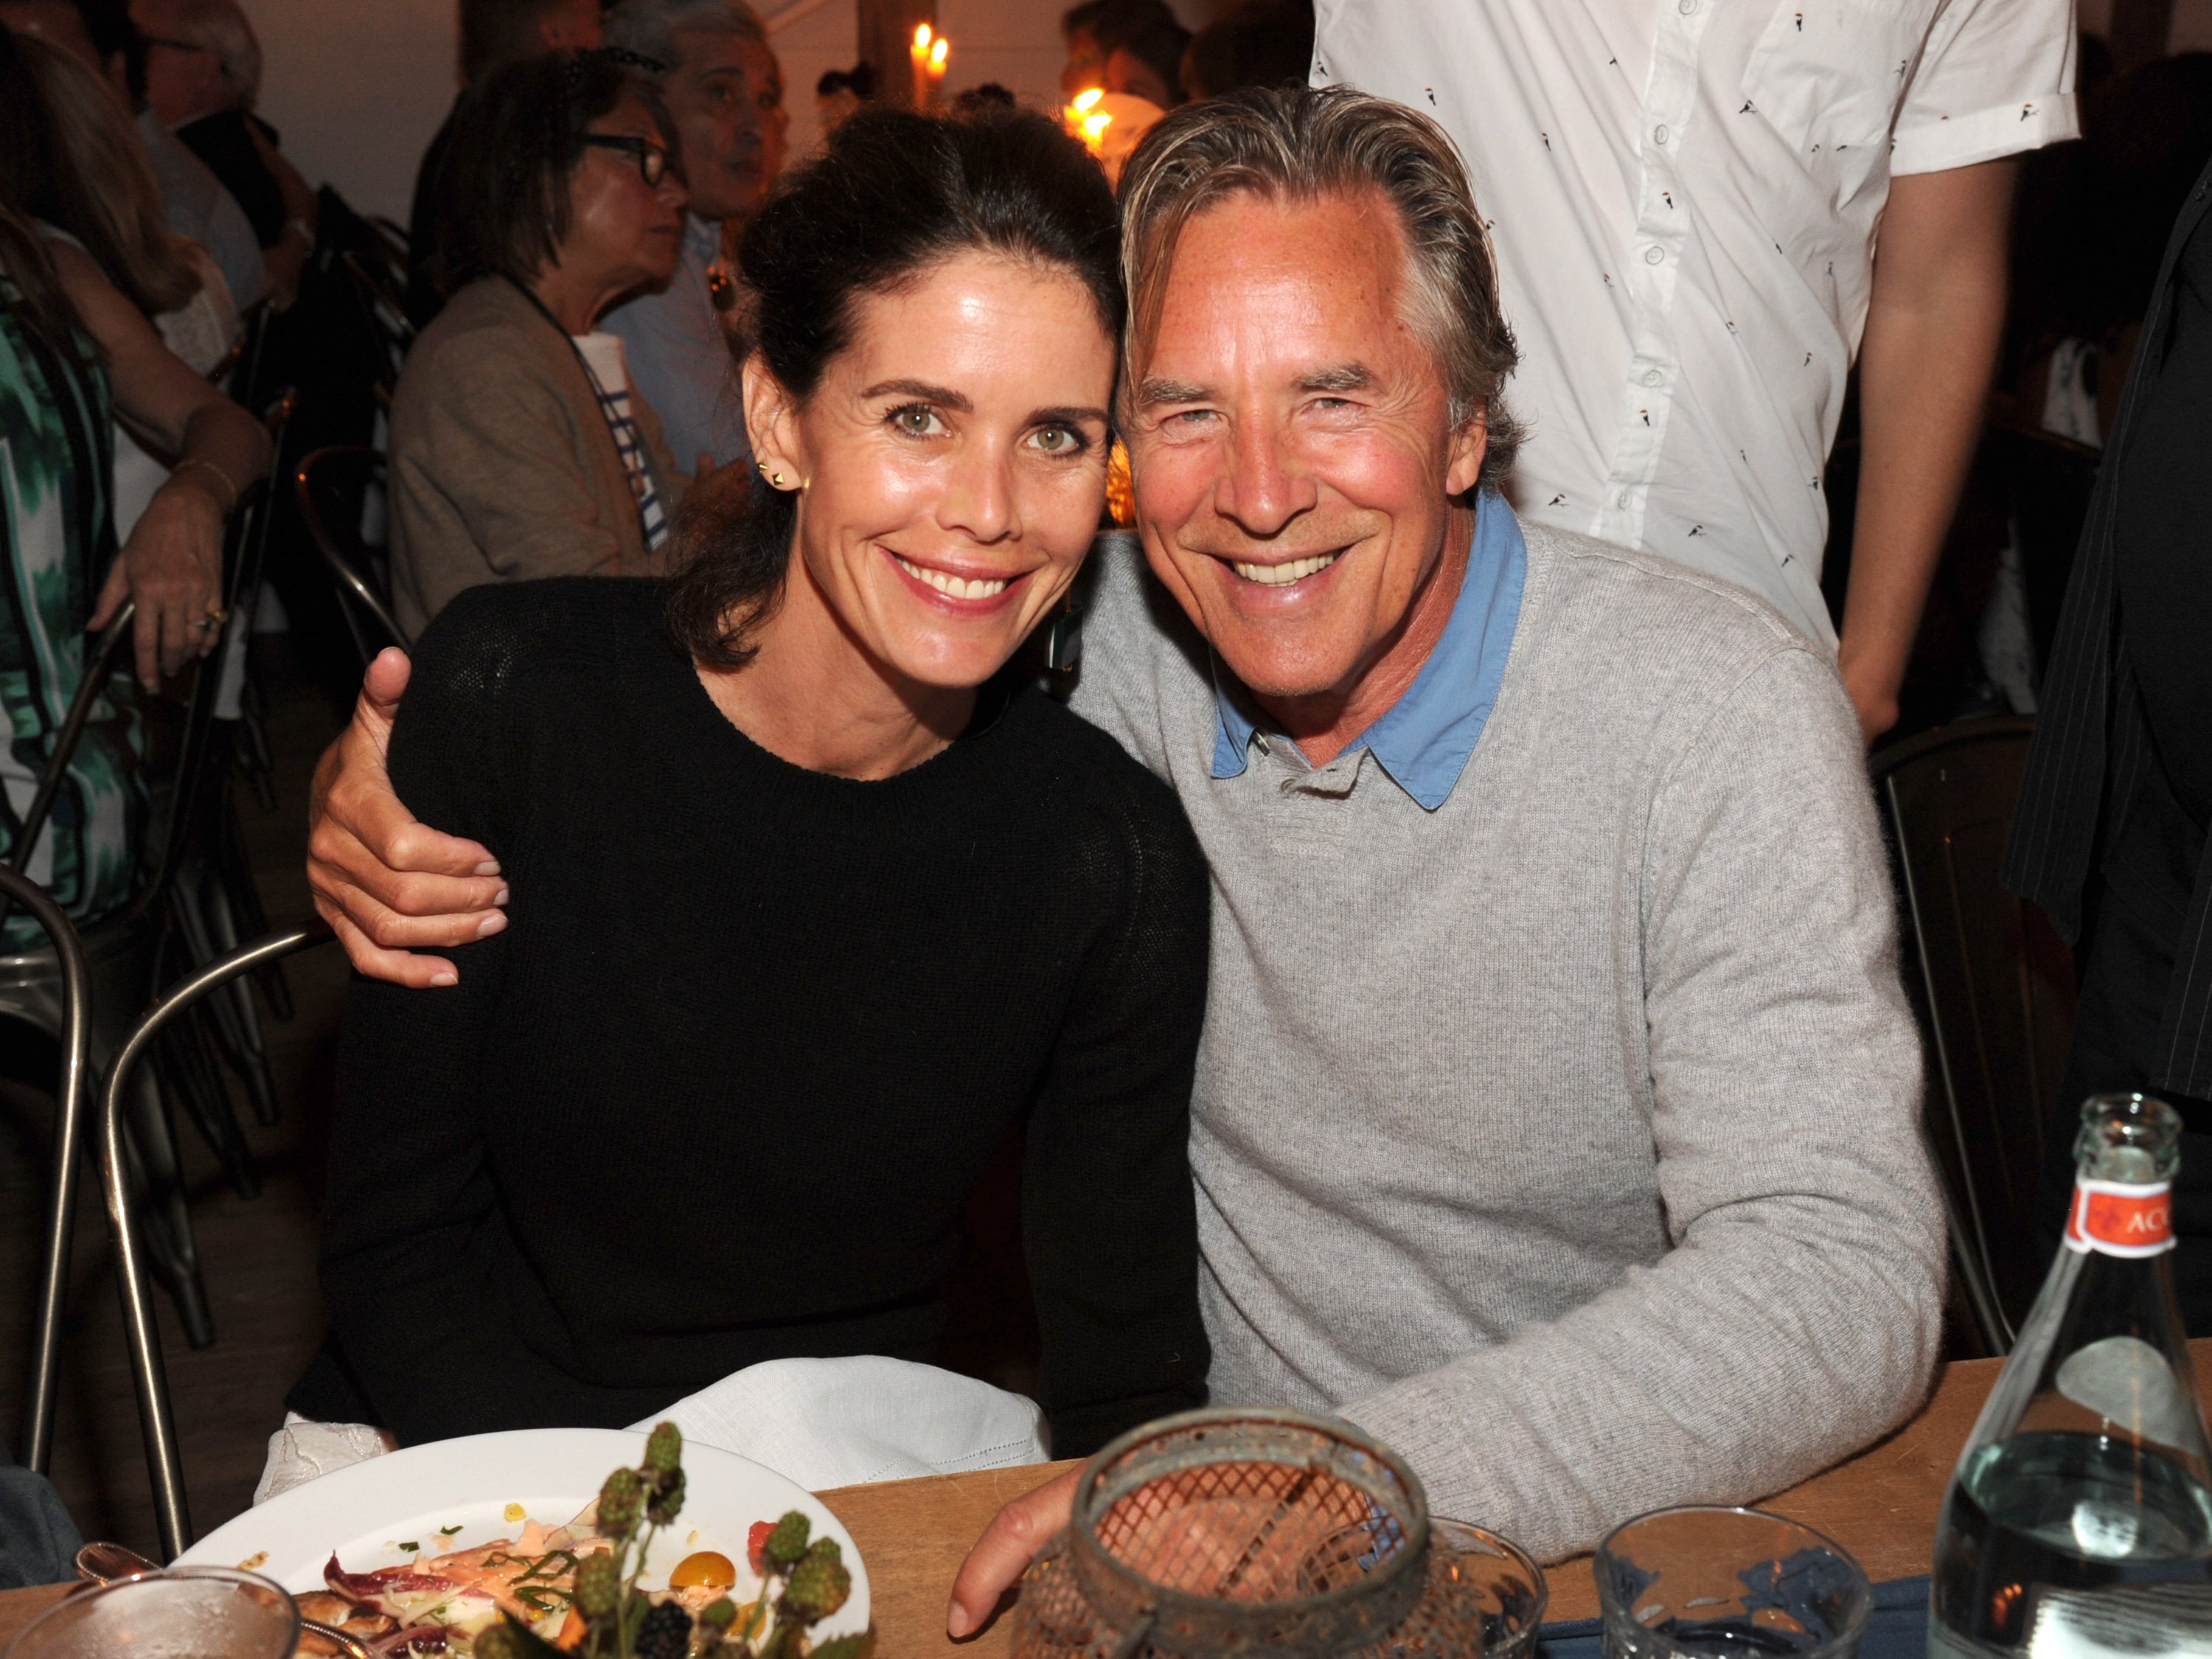 Kelley Phleger and Don Johnson at Apollo in the Hamptons on August 16, 2014, in East Hampton, New York | Source: Getty Images